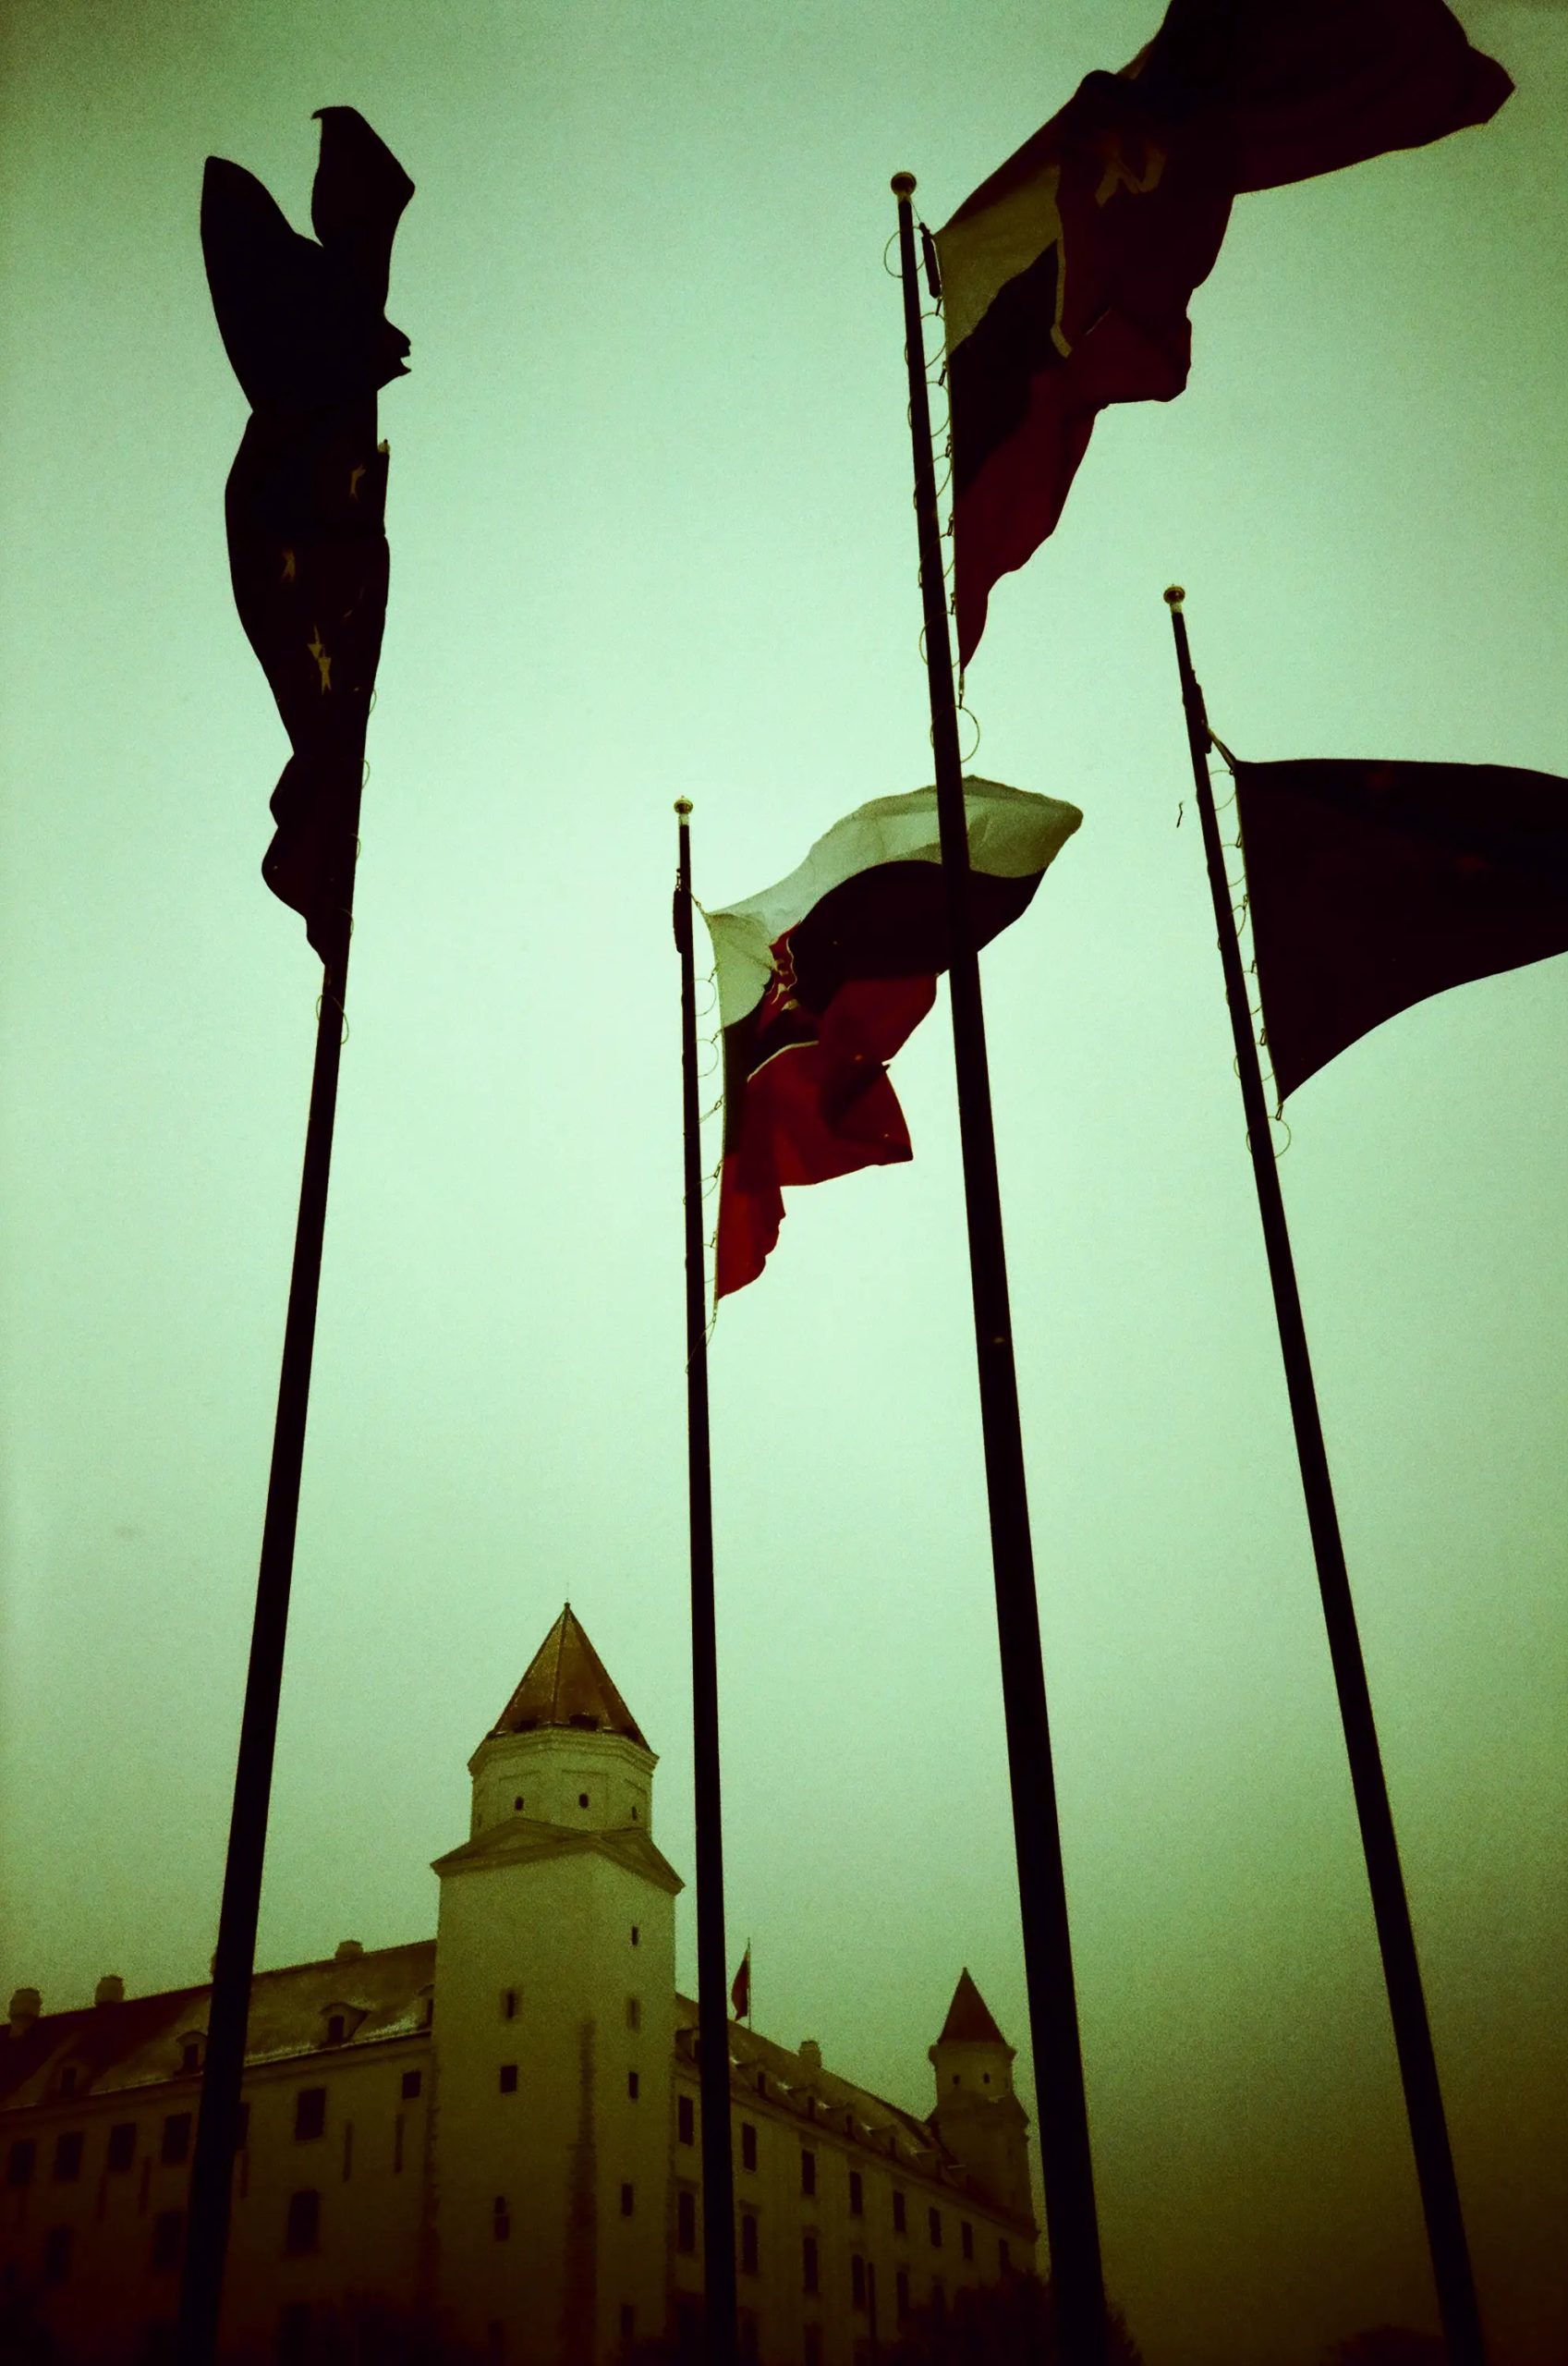 Slovak and European Union flags fly in the wind with the Bratislava Castle in the background. Bratislava, Slovakia, 2014.